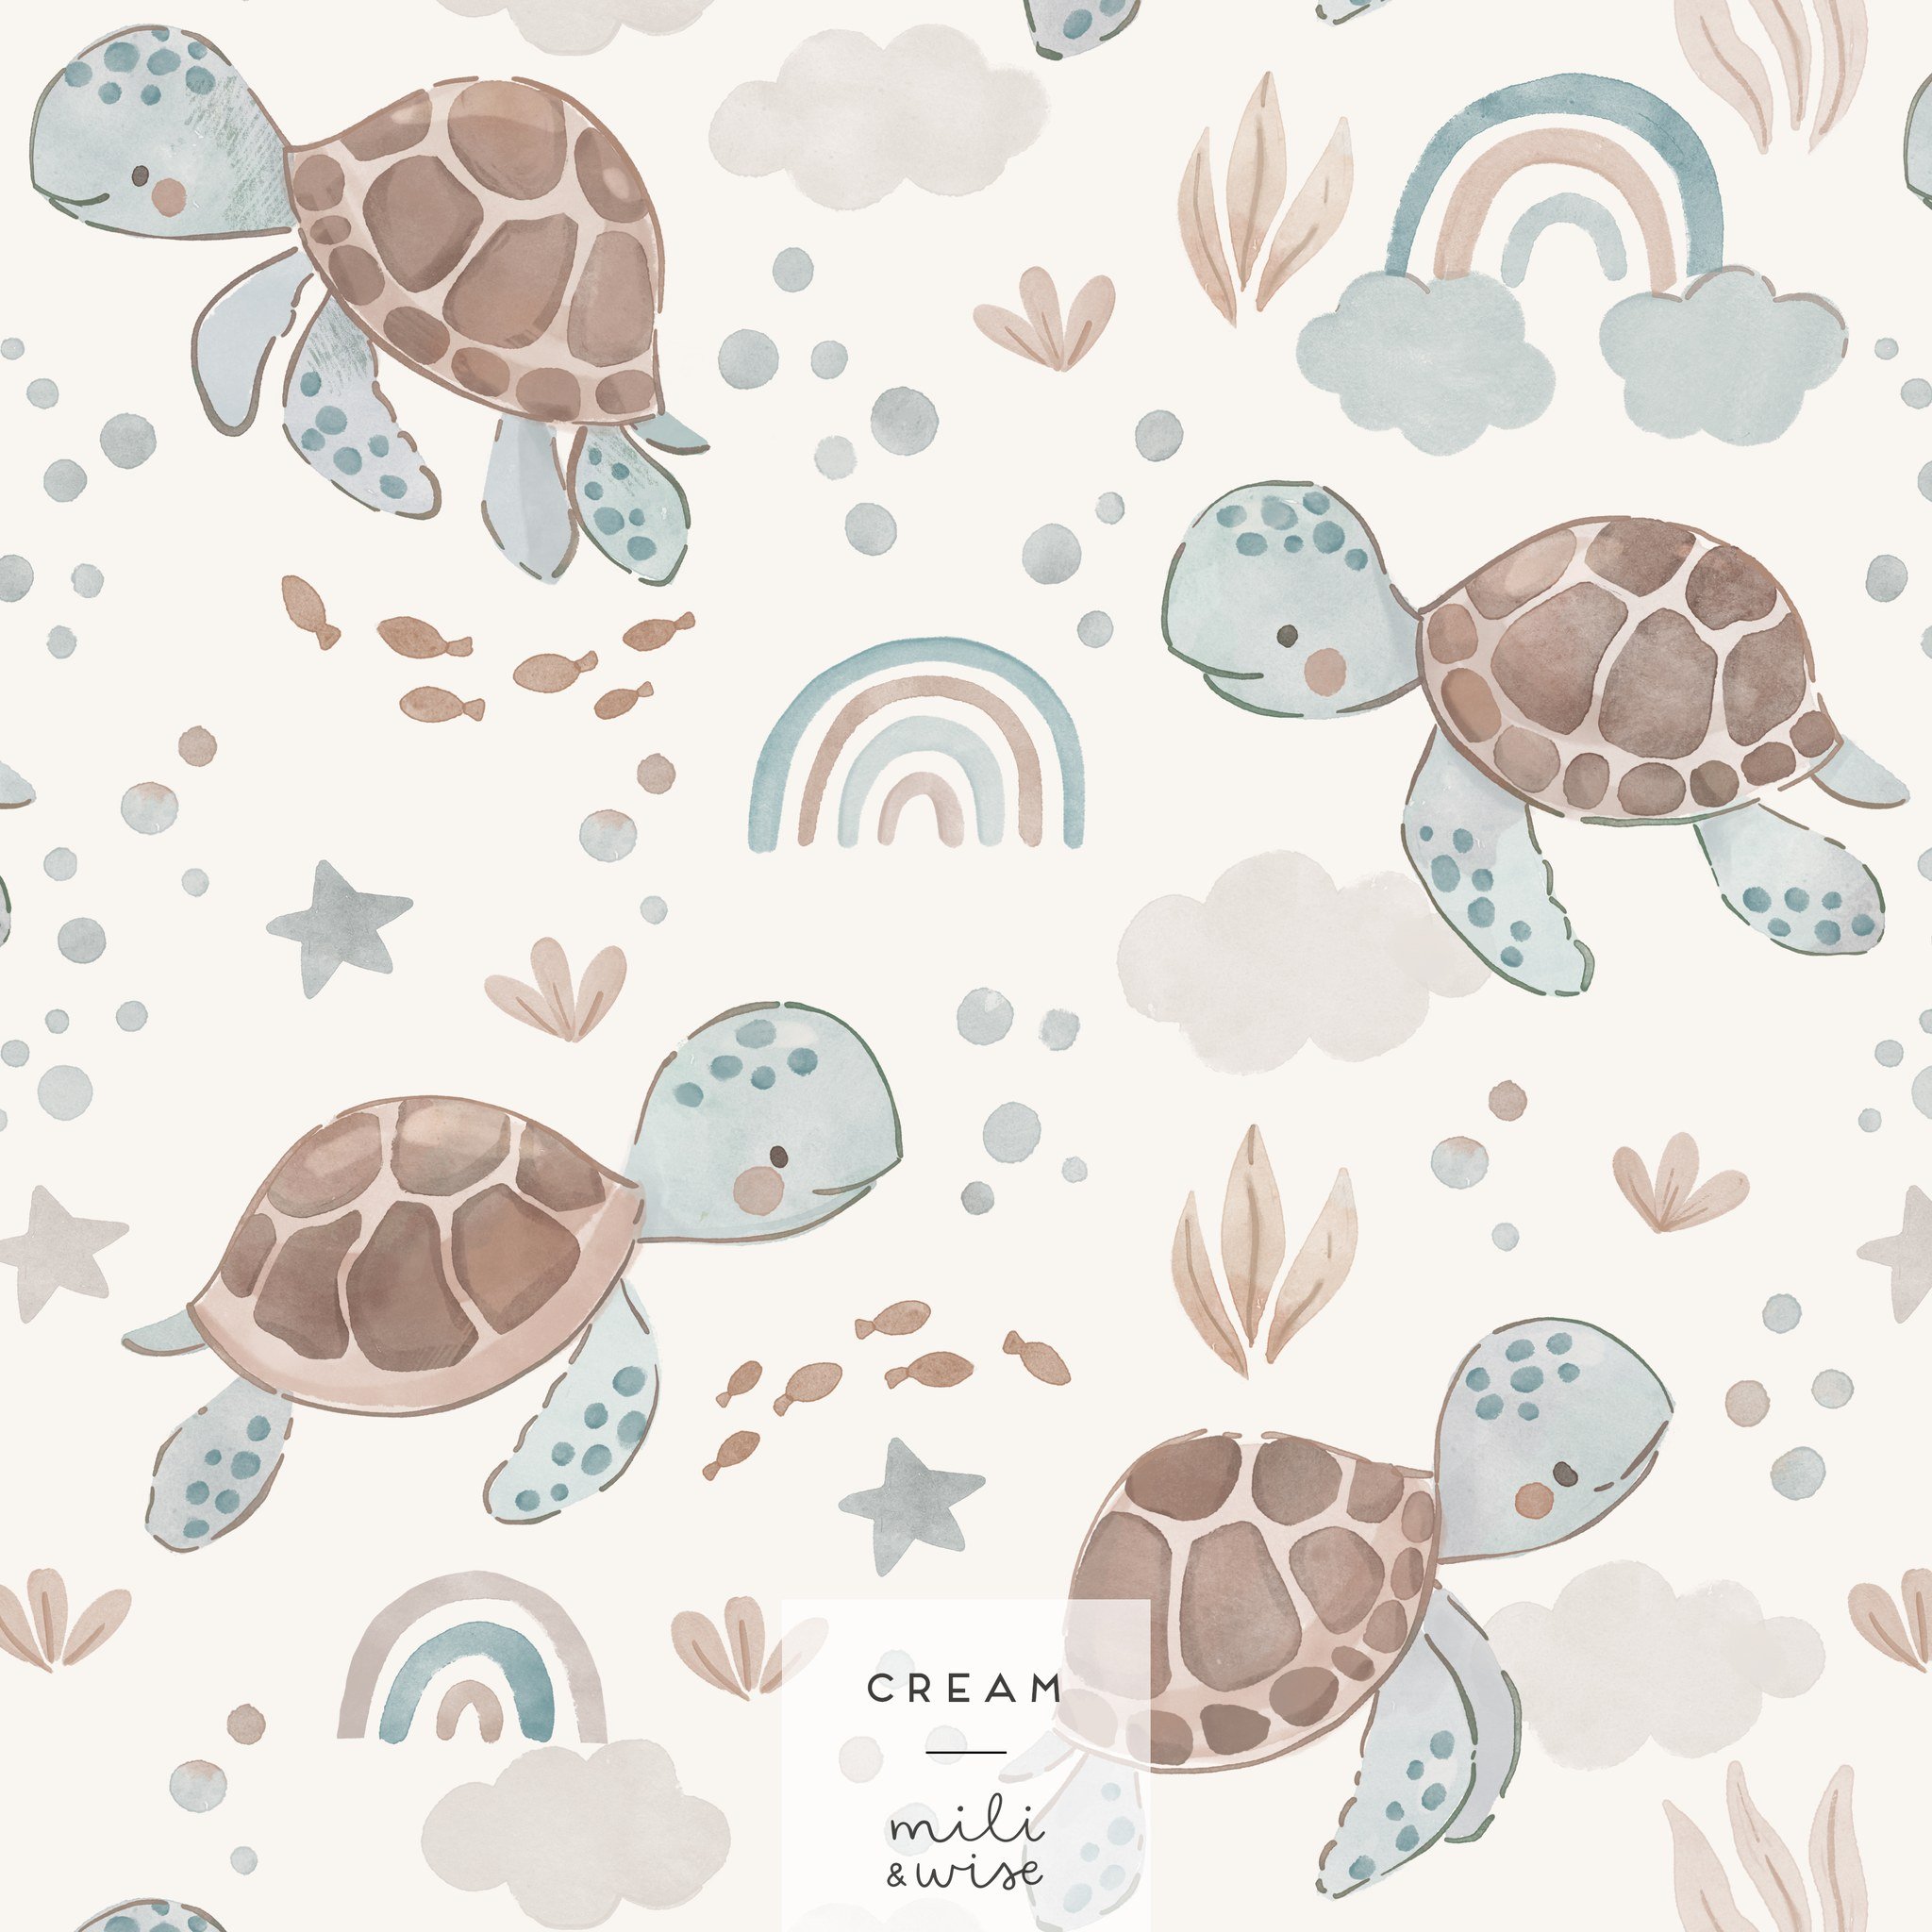 ⭐ AVAILABLE ⭐ | Tristen

New seamless repeat pattern. Please comment your chosen colourway to claim colour exclusivity.

30 x 30 cm repeat design tile
JPG file at 300 dpi
&euro;35 each exclusive colourway

Feel free to change the scale.
Please DM if 